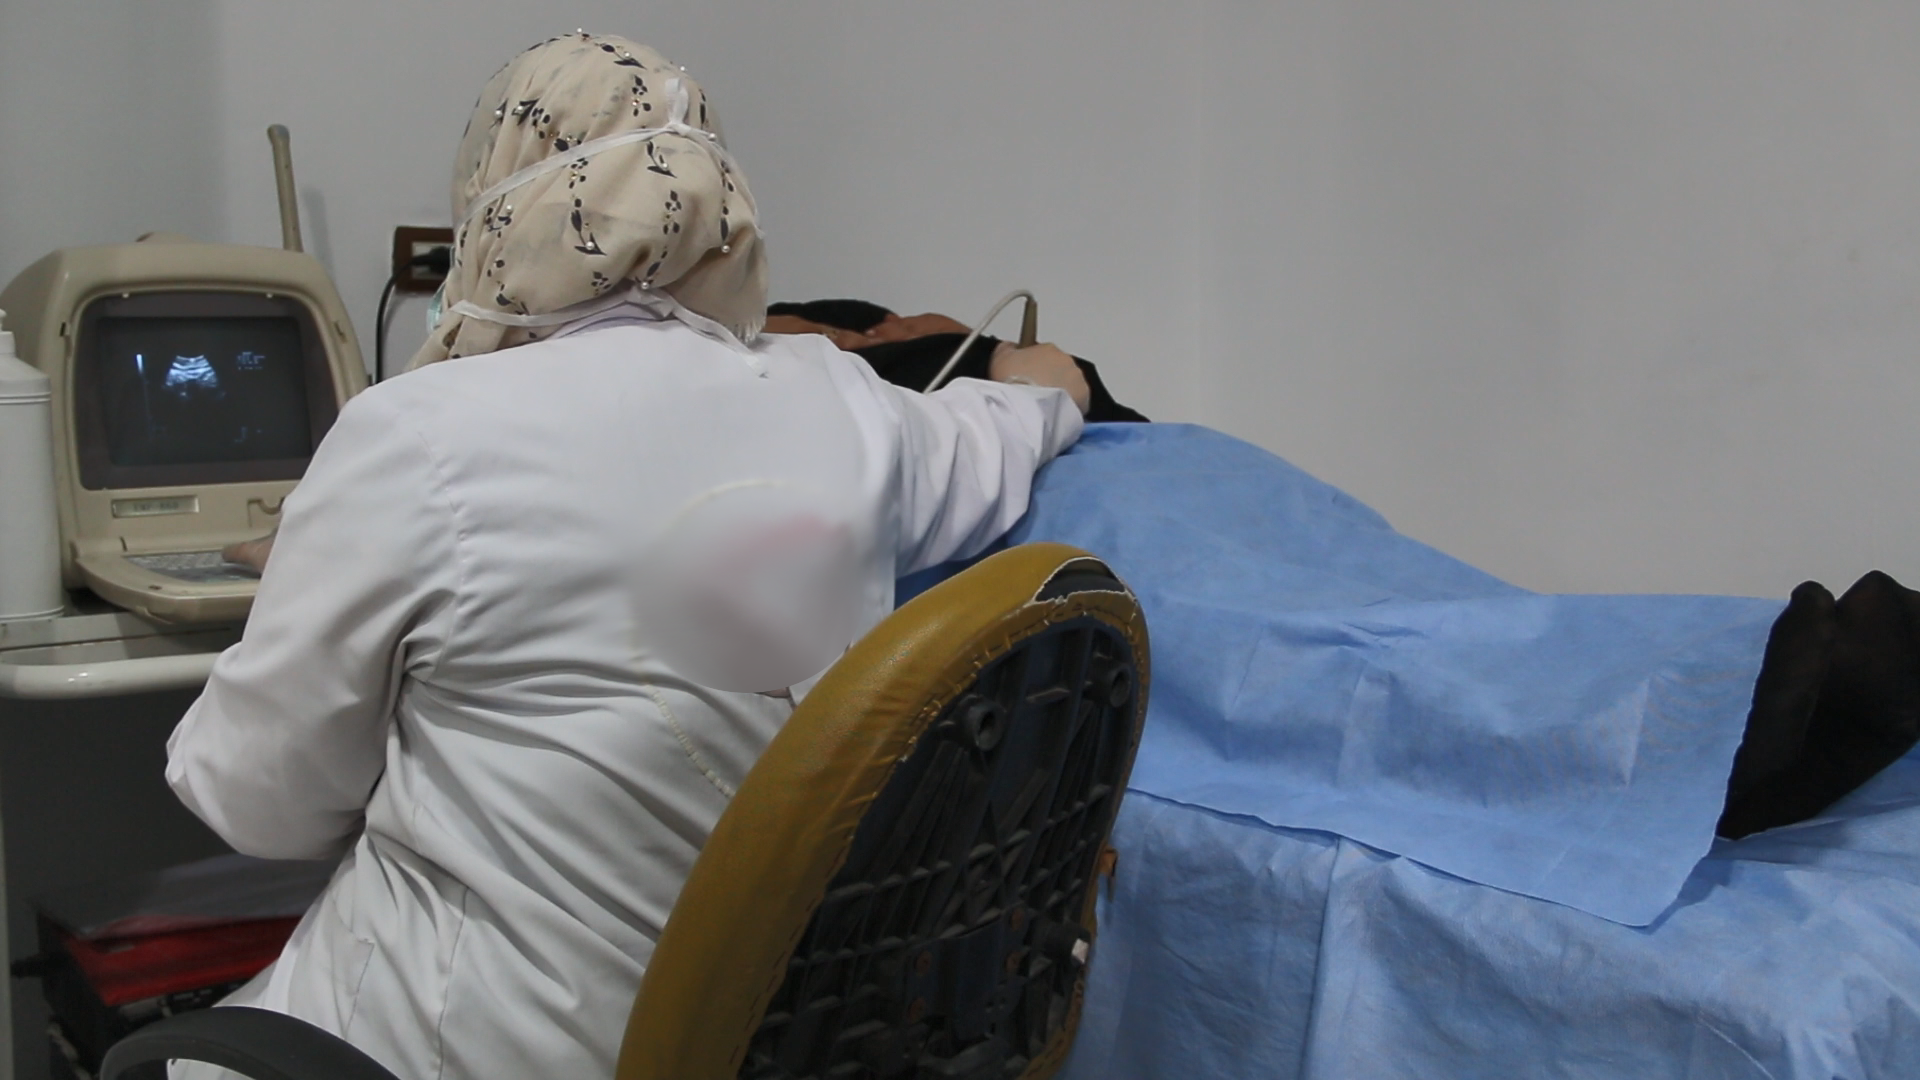 A 35-year-old pregnant woman periodically visits WV’s health centre in Northwest Syria to check on her pregnancy and baby's health, and to receive advice from the centre’s midwife.